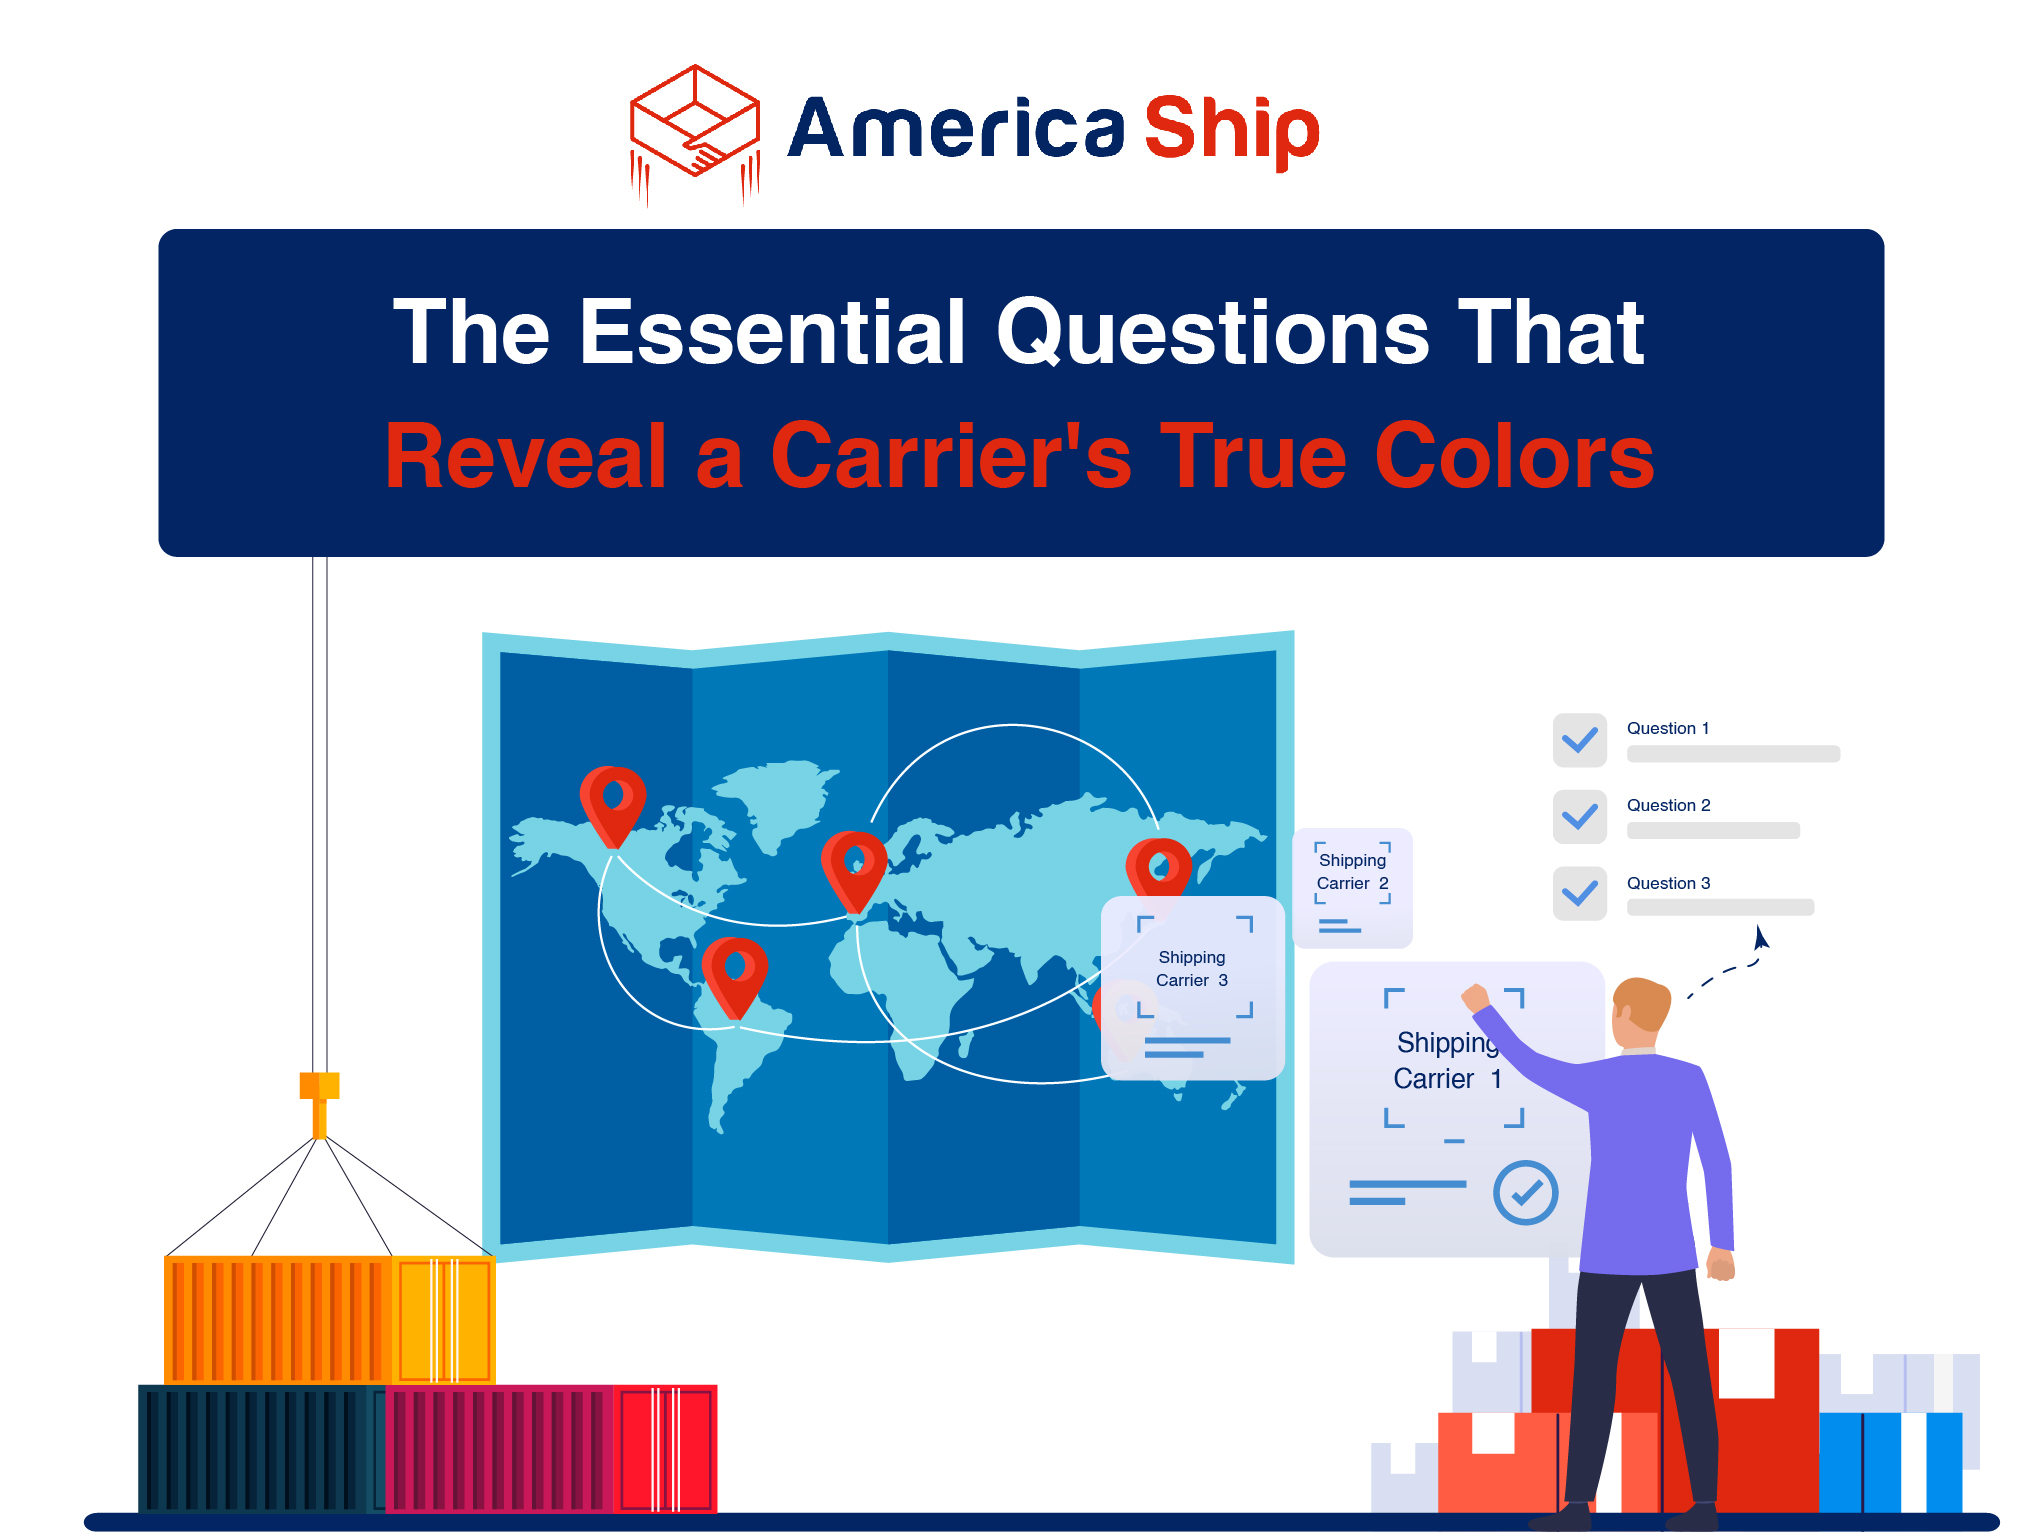 The Essential Questions That Reveal a Carrier’s True Colors